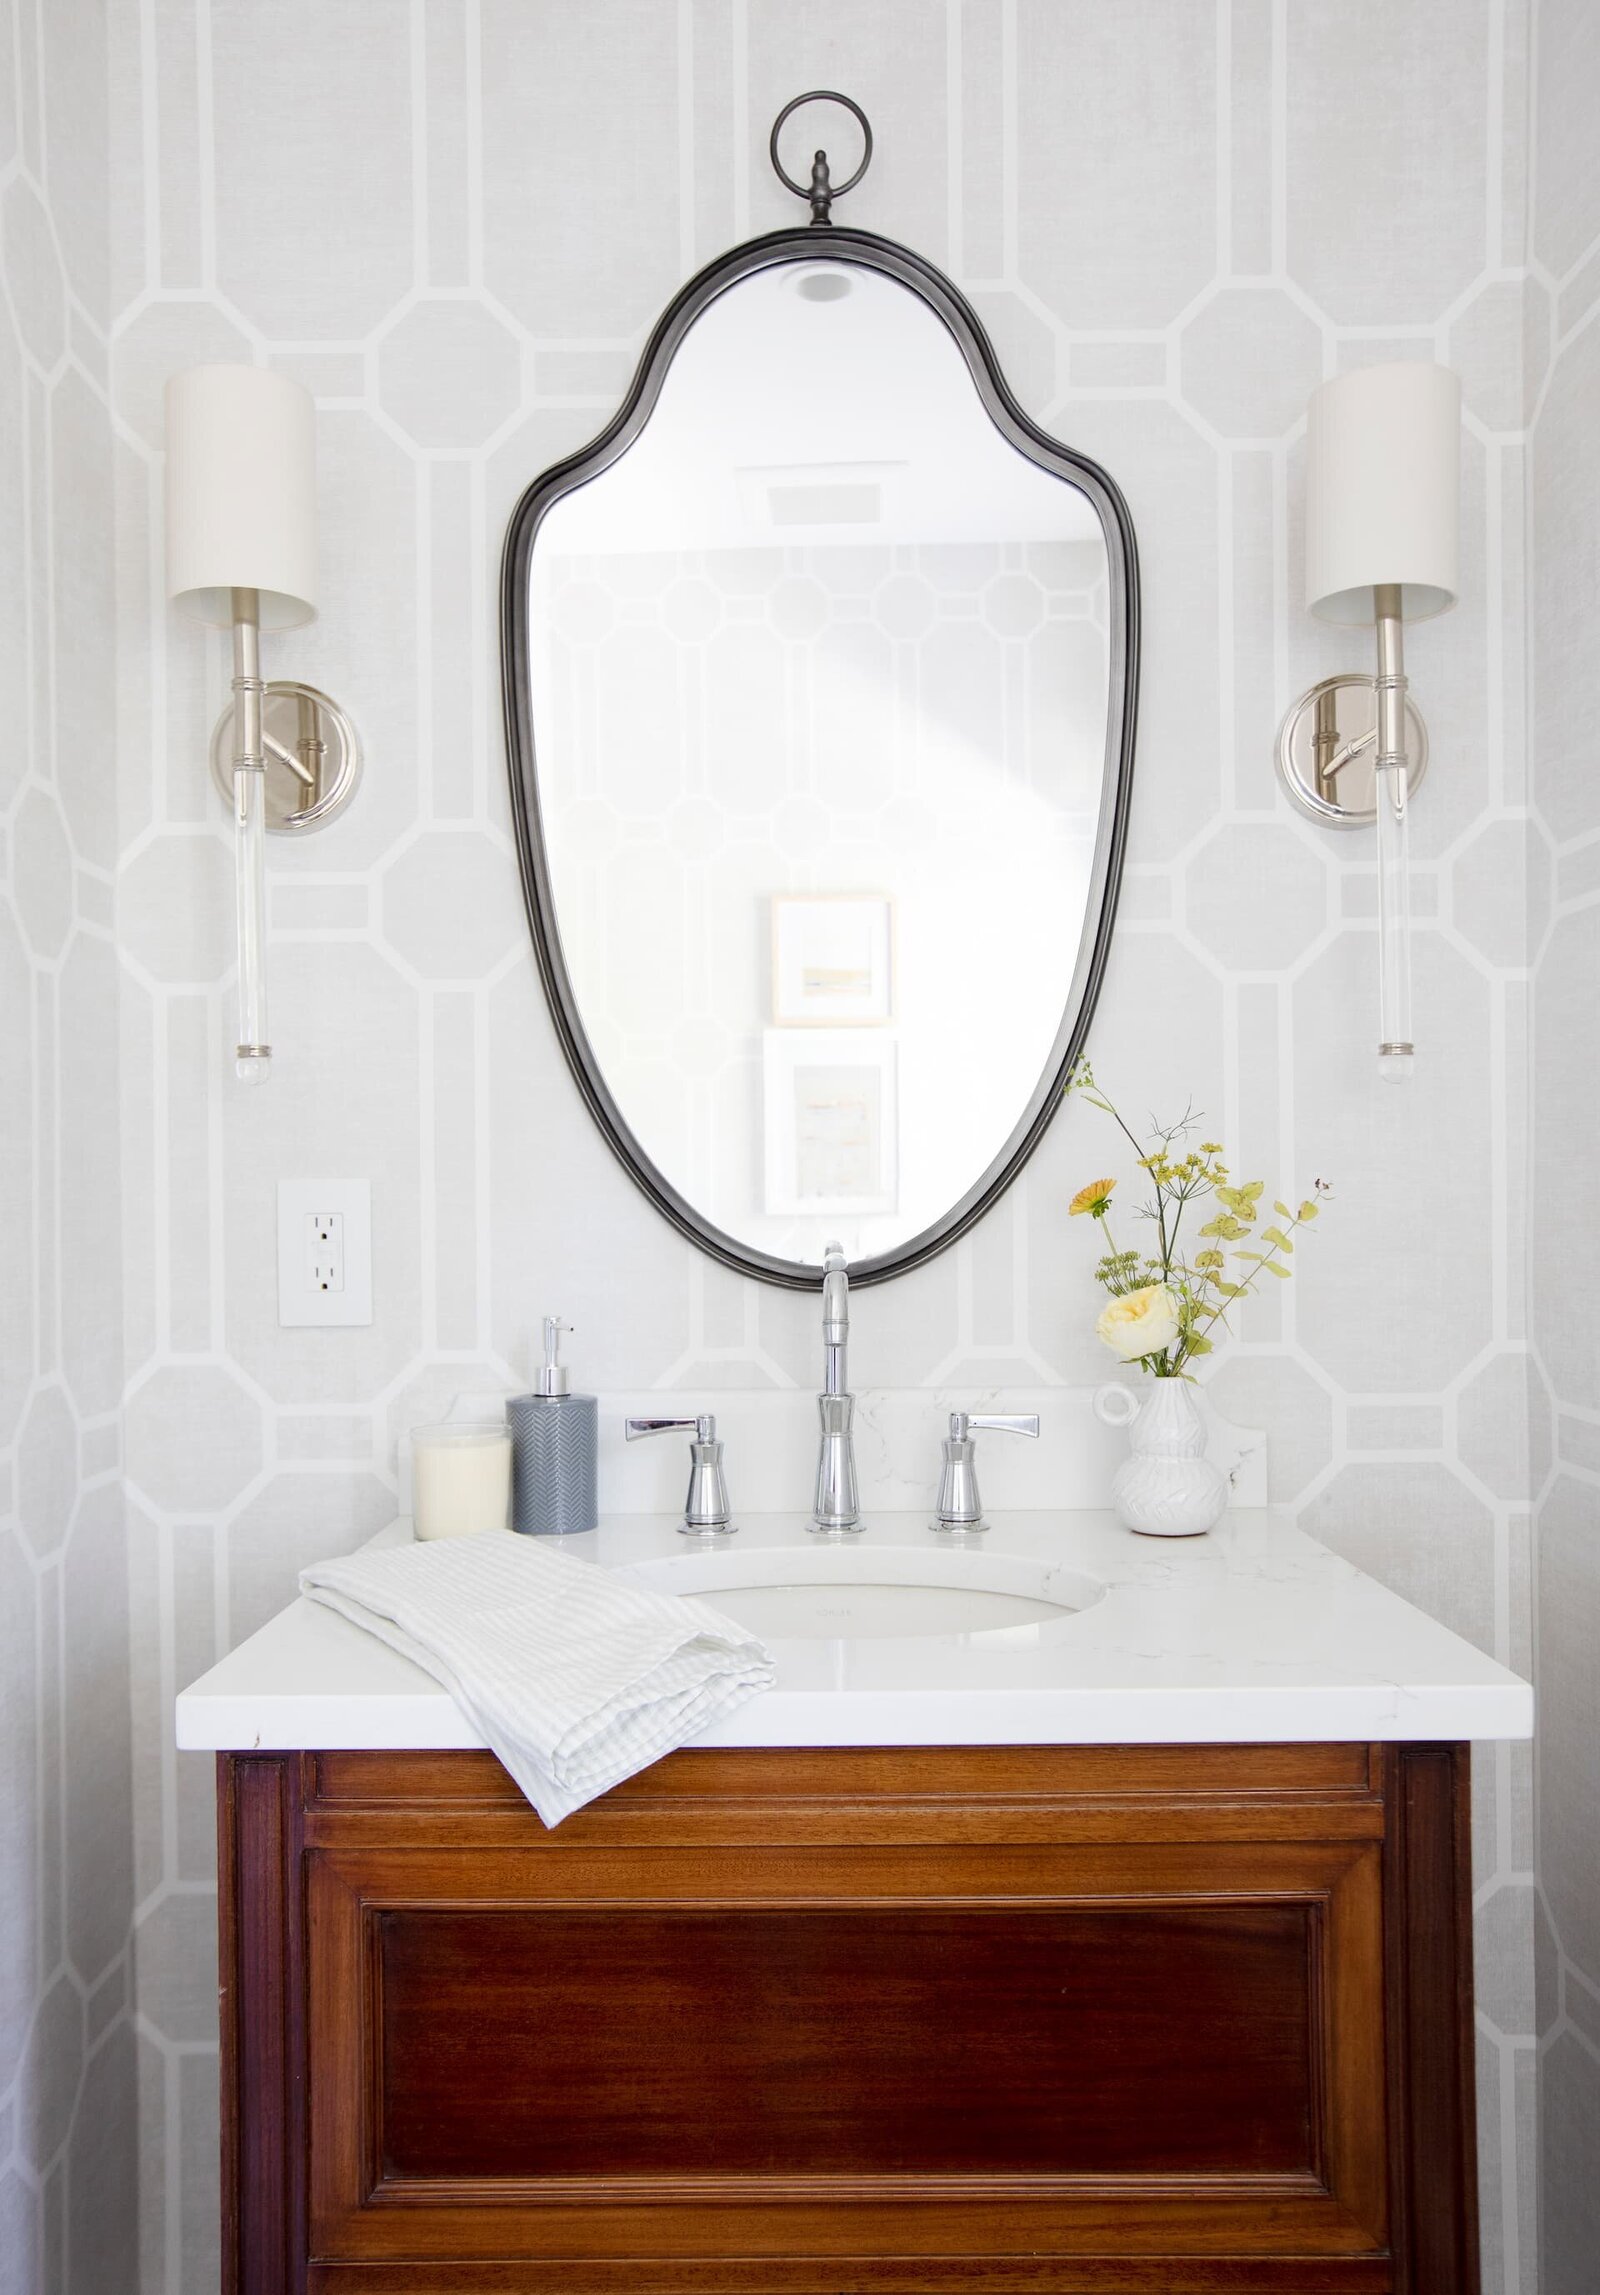 Granville Street l Powder Room with Trellis Wallpaper l Vintage Vanity with Black Mirror and pair of Lucite Wall Sconces